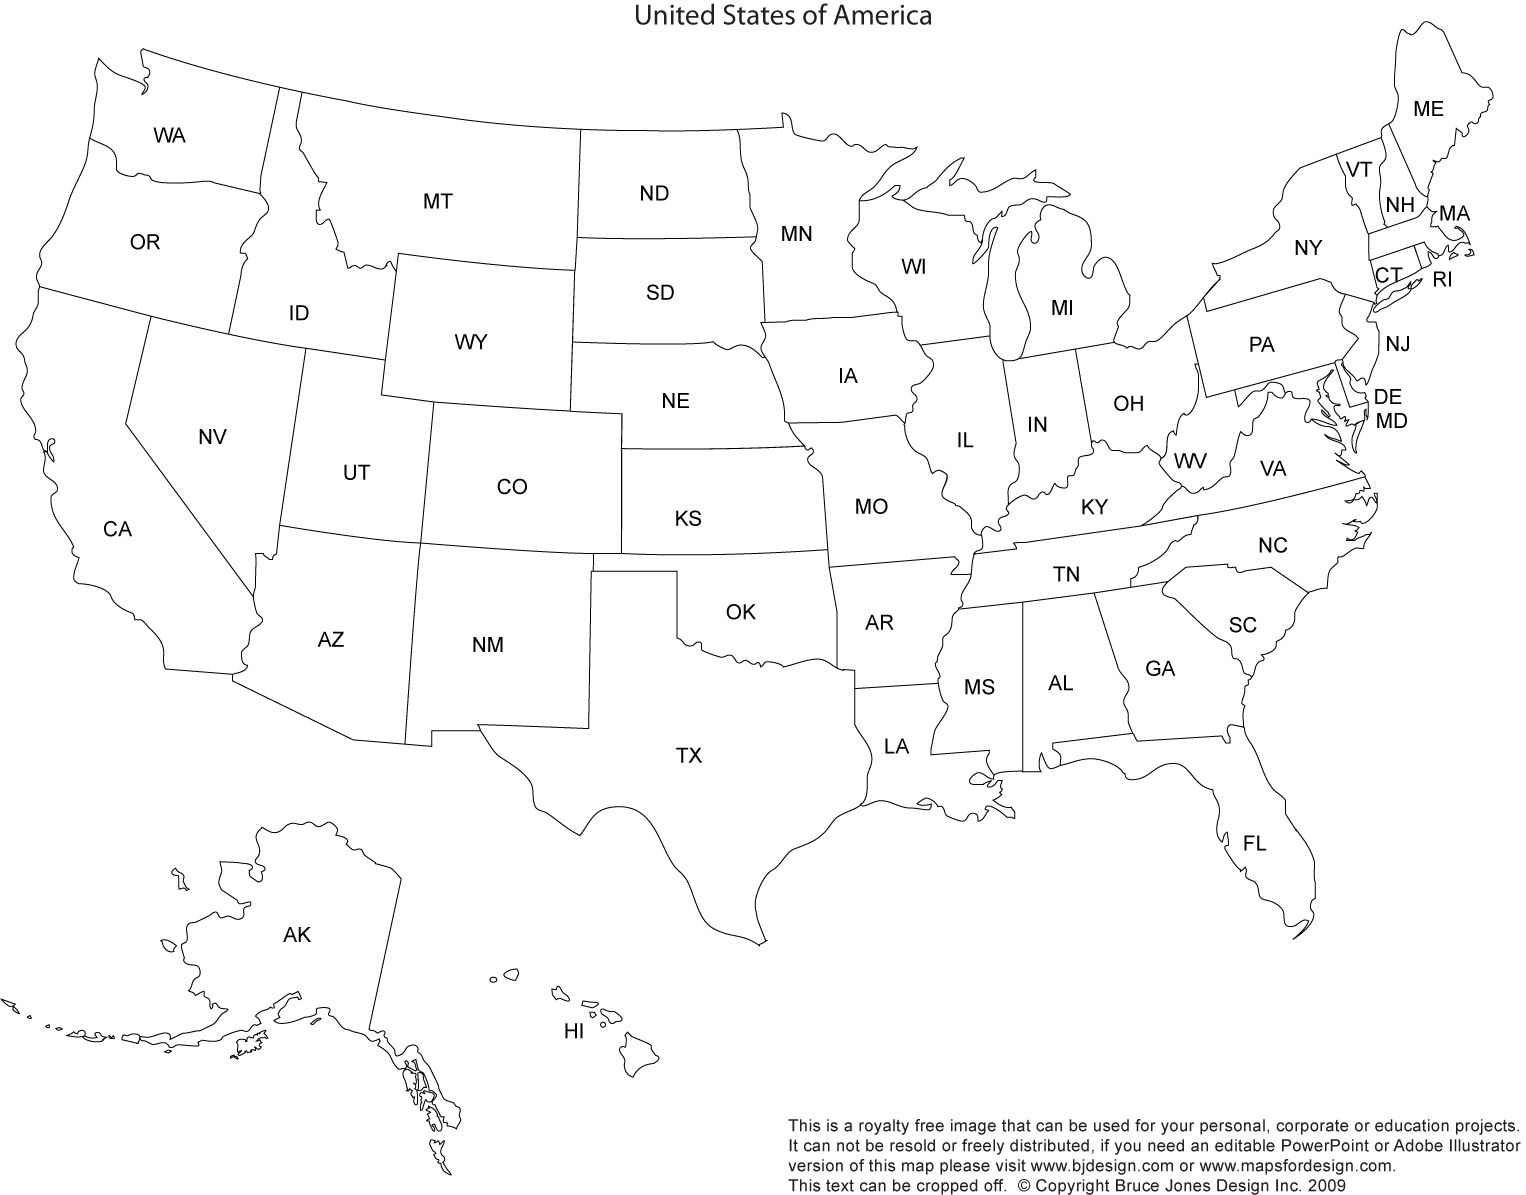 Print Out A Blank Map Of The Us And Have The Kids Color In States - Free Printable Maps For Kids